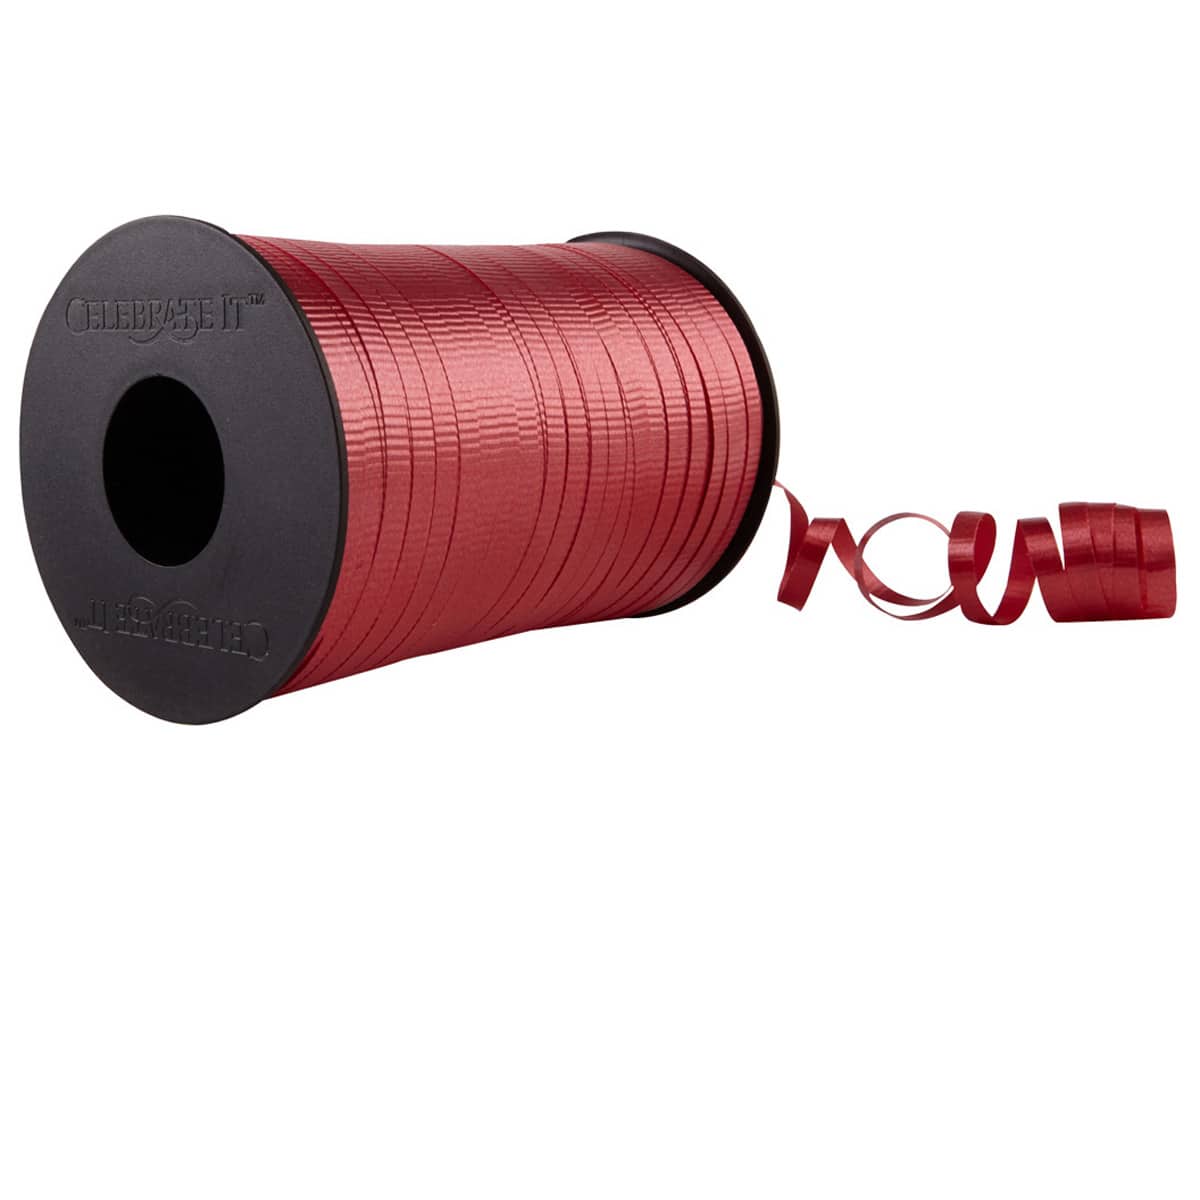 500yd. Textured Curling Ribbon by Celebrate It™